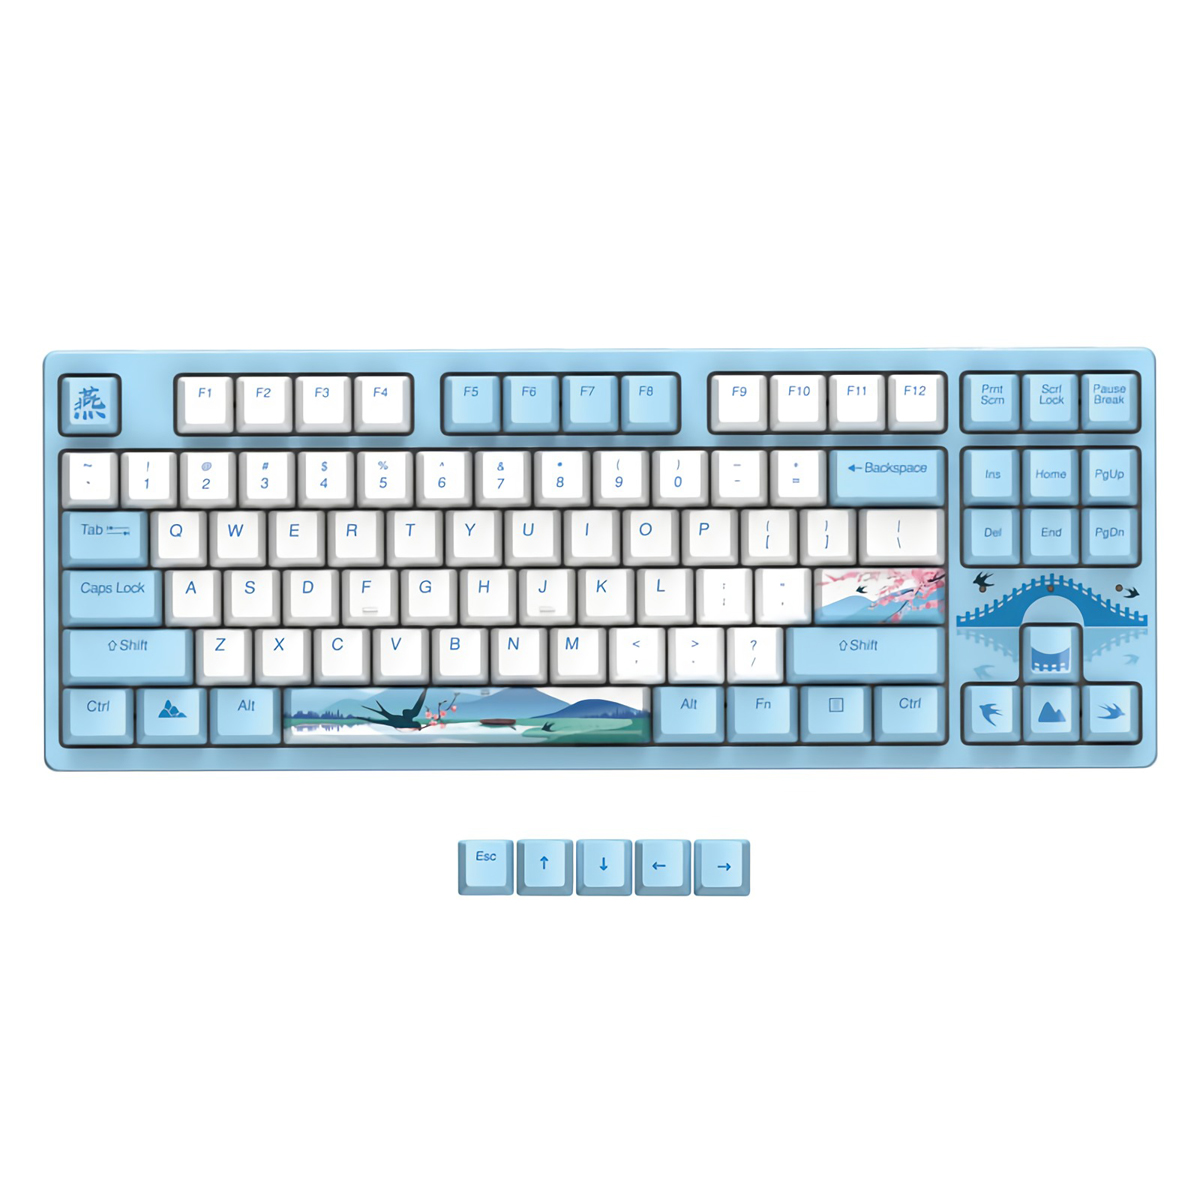 Find DAREU A87 Mechanical Keyboard Swallow Theme Wired Ice Blue Backlight 87 Keys Cherry MX Switch Blue PBT Keycaps Gaming Keyboard for Sale on Gipsybee.com with cryptocurrencies